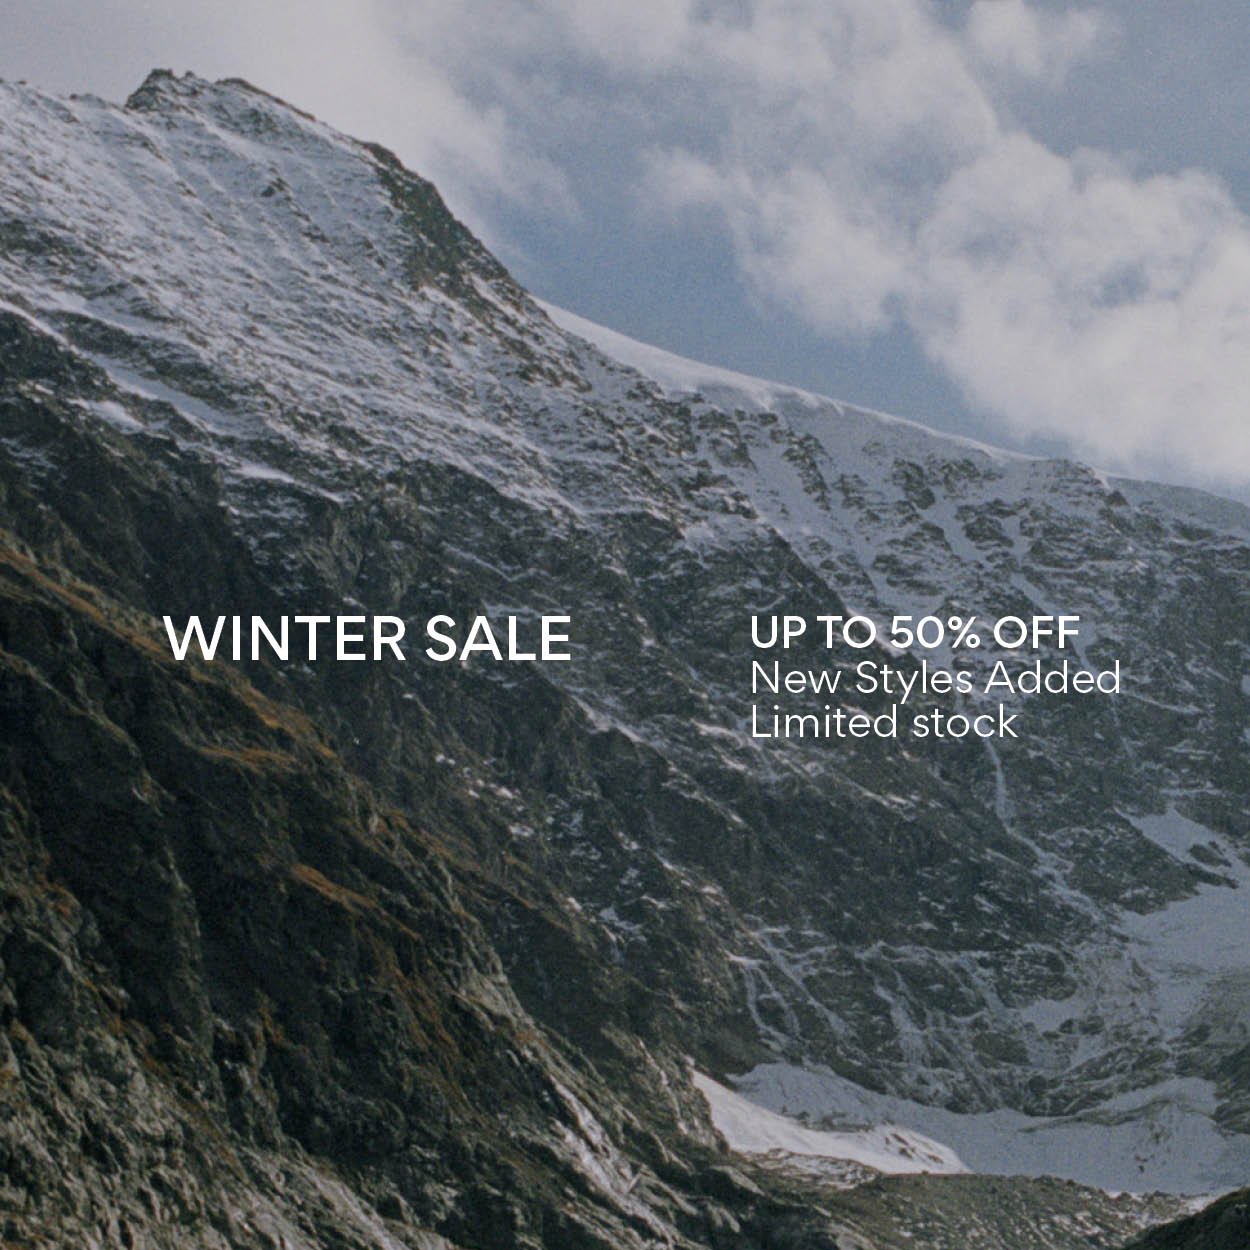 Winter Sale. Up to 50% Off New Styles Added Limited stock.